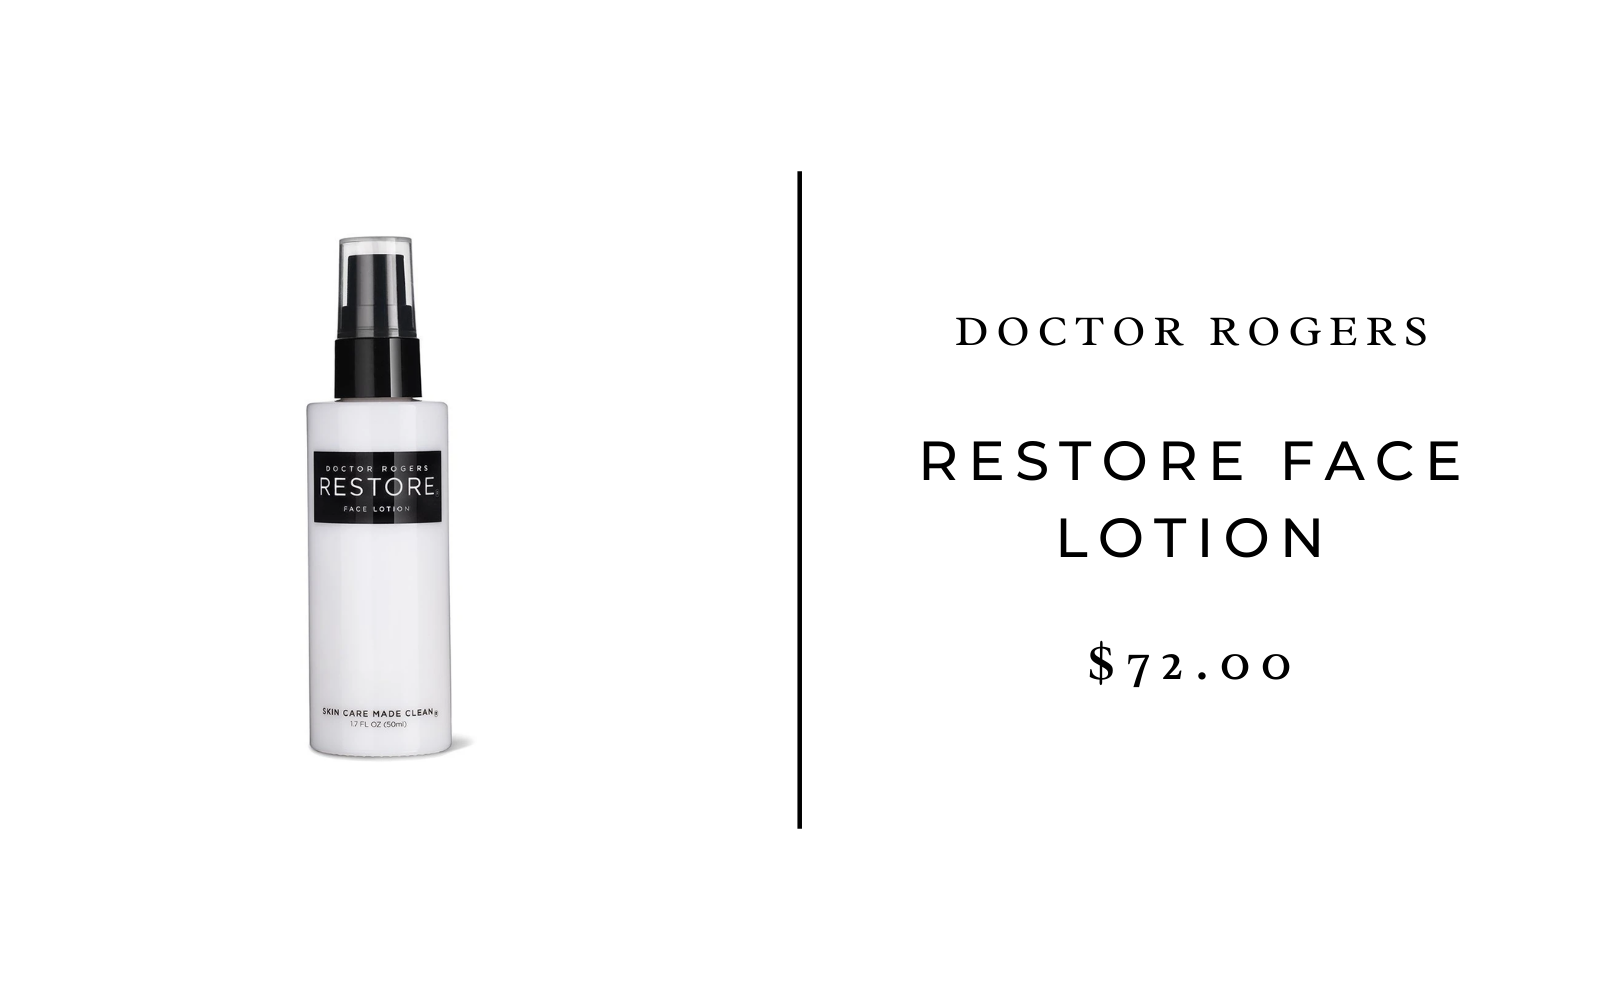 Dr. Rogers RESTORE Face Lotion